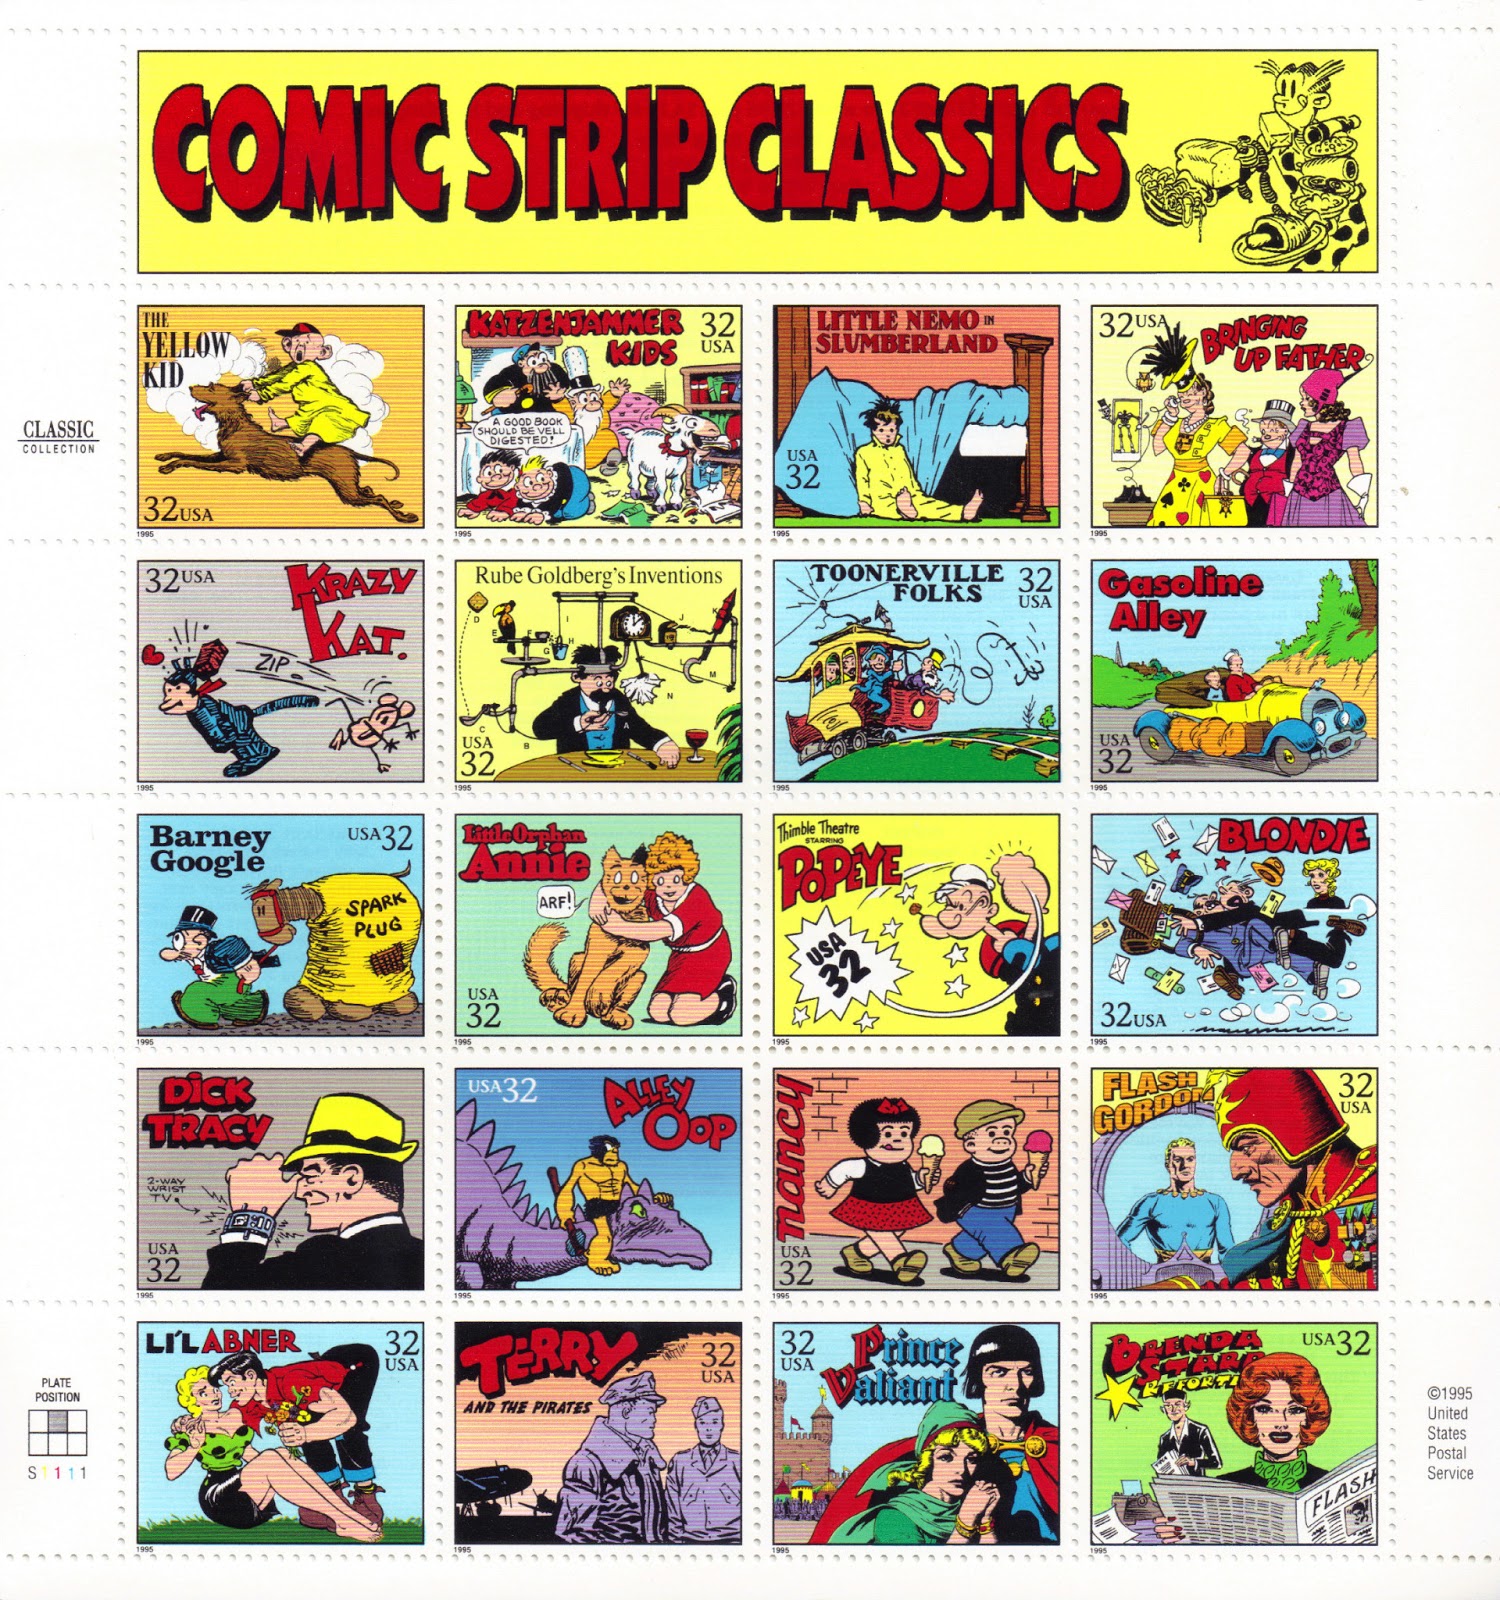 Comic Strip Classics, U.S. Postal Service sheet of stamps issued by the U.S. Postal Service in 1995,
	featuring Dagwood Bumstead with makings for a Dagwood sandwich balanced precariously on his extended arms,
	heading a block of stamps representing the main characters of 20 comic strips:
	The Yellow Kid (a young boy in a yellow nightgown rides a brown dog, holding onto the dog's ears),
	Katzenjammer Kids (a white goat chews books from a shelf, the Captain and the Inspector run into the room, and the two boys, Hans and Fritz, kneel and say 'A good book should be well digested'),
	Little Nemo in Slumberland (a young boy in a yellow nightgown is fallen out of bed and onto the floor with his hair dishevelled and his legs out),
	Bringing Up Father (Jiggs, a short man in top hat, tails, and cigar sticking out the side of his mouth, takes the arms of two much taller women, his wife, Maggie, and their daughter, Nora),
	Krazy Kat (Ignatz the mouse throws a brick at Krazy Kat, a black cat with a pink face),
	Rube Goldberg’s Inventions (a man sits at a table eating soup with an elaborate mechanism strapped to his head to cause a napkin to wipe his chin),
	Toonerville Folks (the Skipper, a white-bearded conductor on an electric trolly, throws out an anchor to help pull the trolly up Homan’s Hill),
	Gasoline Alley (Walt drives with young Skeezix on a country road in an old two-seat convertable car, bags packed on the running board),
	Barney Google (Barney leads his horse, Spark Plug, covered in a ragged yellow blanket),
	Little Orphan Annie (Annie in a red dress and on her knees huggs her orange dog, Sandy),
	Thimble Theater staring Popeye (Popeye swings his fist and 'USA 32' is displayed in the impact),
	Blondie (Blondie watches Dagwood as he collides into Mr. Beasley, the mailman, mail flying into the air),
	Dick Tracy (Tracy, wearing a black suit and yellow hat, checks his two-way wrist TV),
	Alley Oop (Alley Oop rides on the neck of his purple pet dinosaur, Dinny, wearing a fur loincloth and holding a stone axe),
	Nancy (Nancy and her friend Sluggo walk on a sidewalk, each with an ice-cream cone),
	Flash Gordon (Gordon, with his yellow hair, in a blue shirt, is seen in the video screen of Ming the Merciless wearing a red military suit and helmet),
	Li'l Abner (Abner with a small bouque of flowers leans over with his arm around Daisy Mae, in a green blouse and short black skirt sitting on the grass),
	Terry and the Pirates (Terry in a jacket and hat of a military pilot with another soldier, the silhouette of a bomber in the background),
	Prince Valiant (the prince, his hair shaped like a black helmet and wearing a red cape, has his arm around his love, Aleta, dressed in green, a castle in the background),
	Brenda Starr, Reporter (Starr, with orange hair and a green scarf, is reading a newspaper, her fingernails painted red).